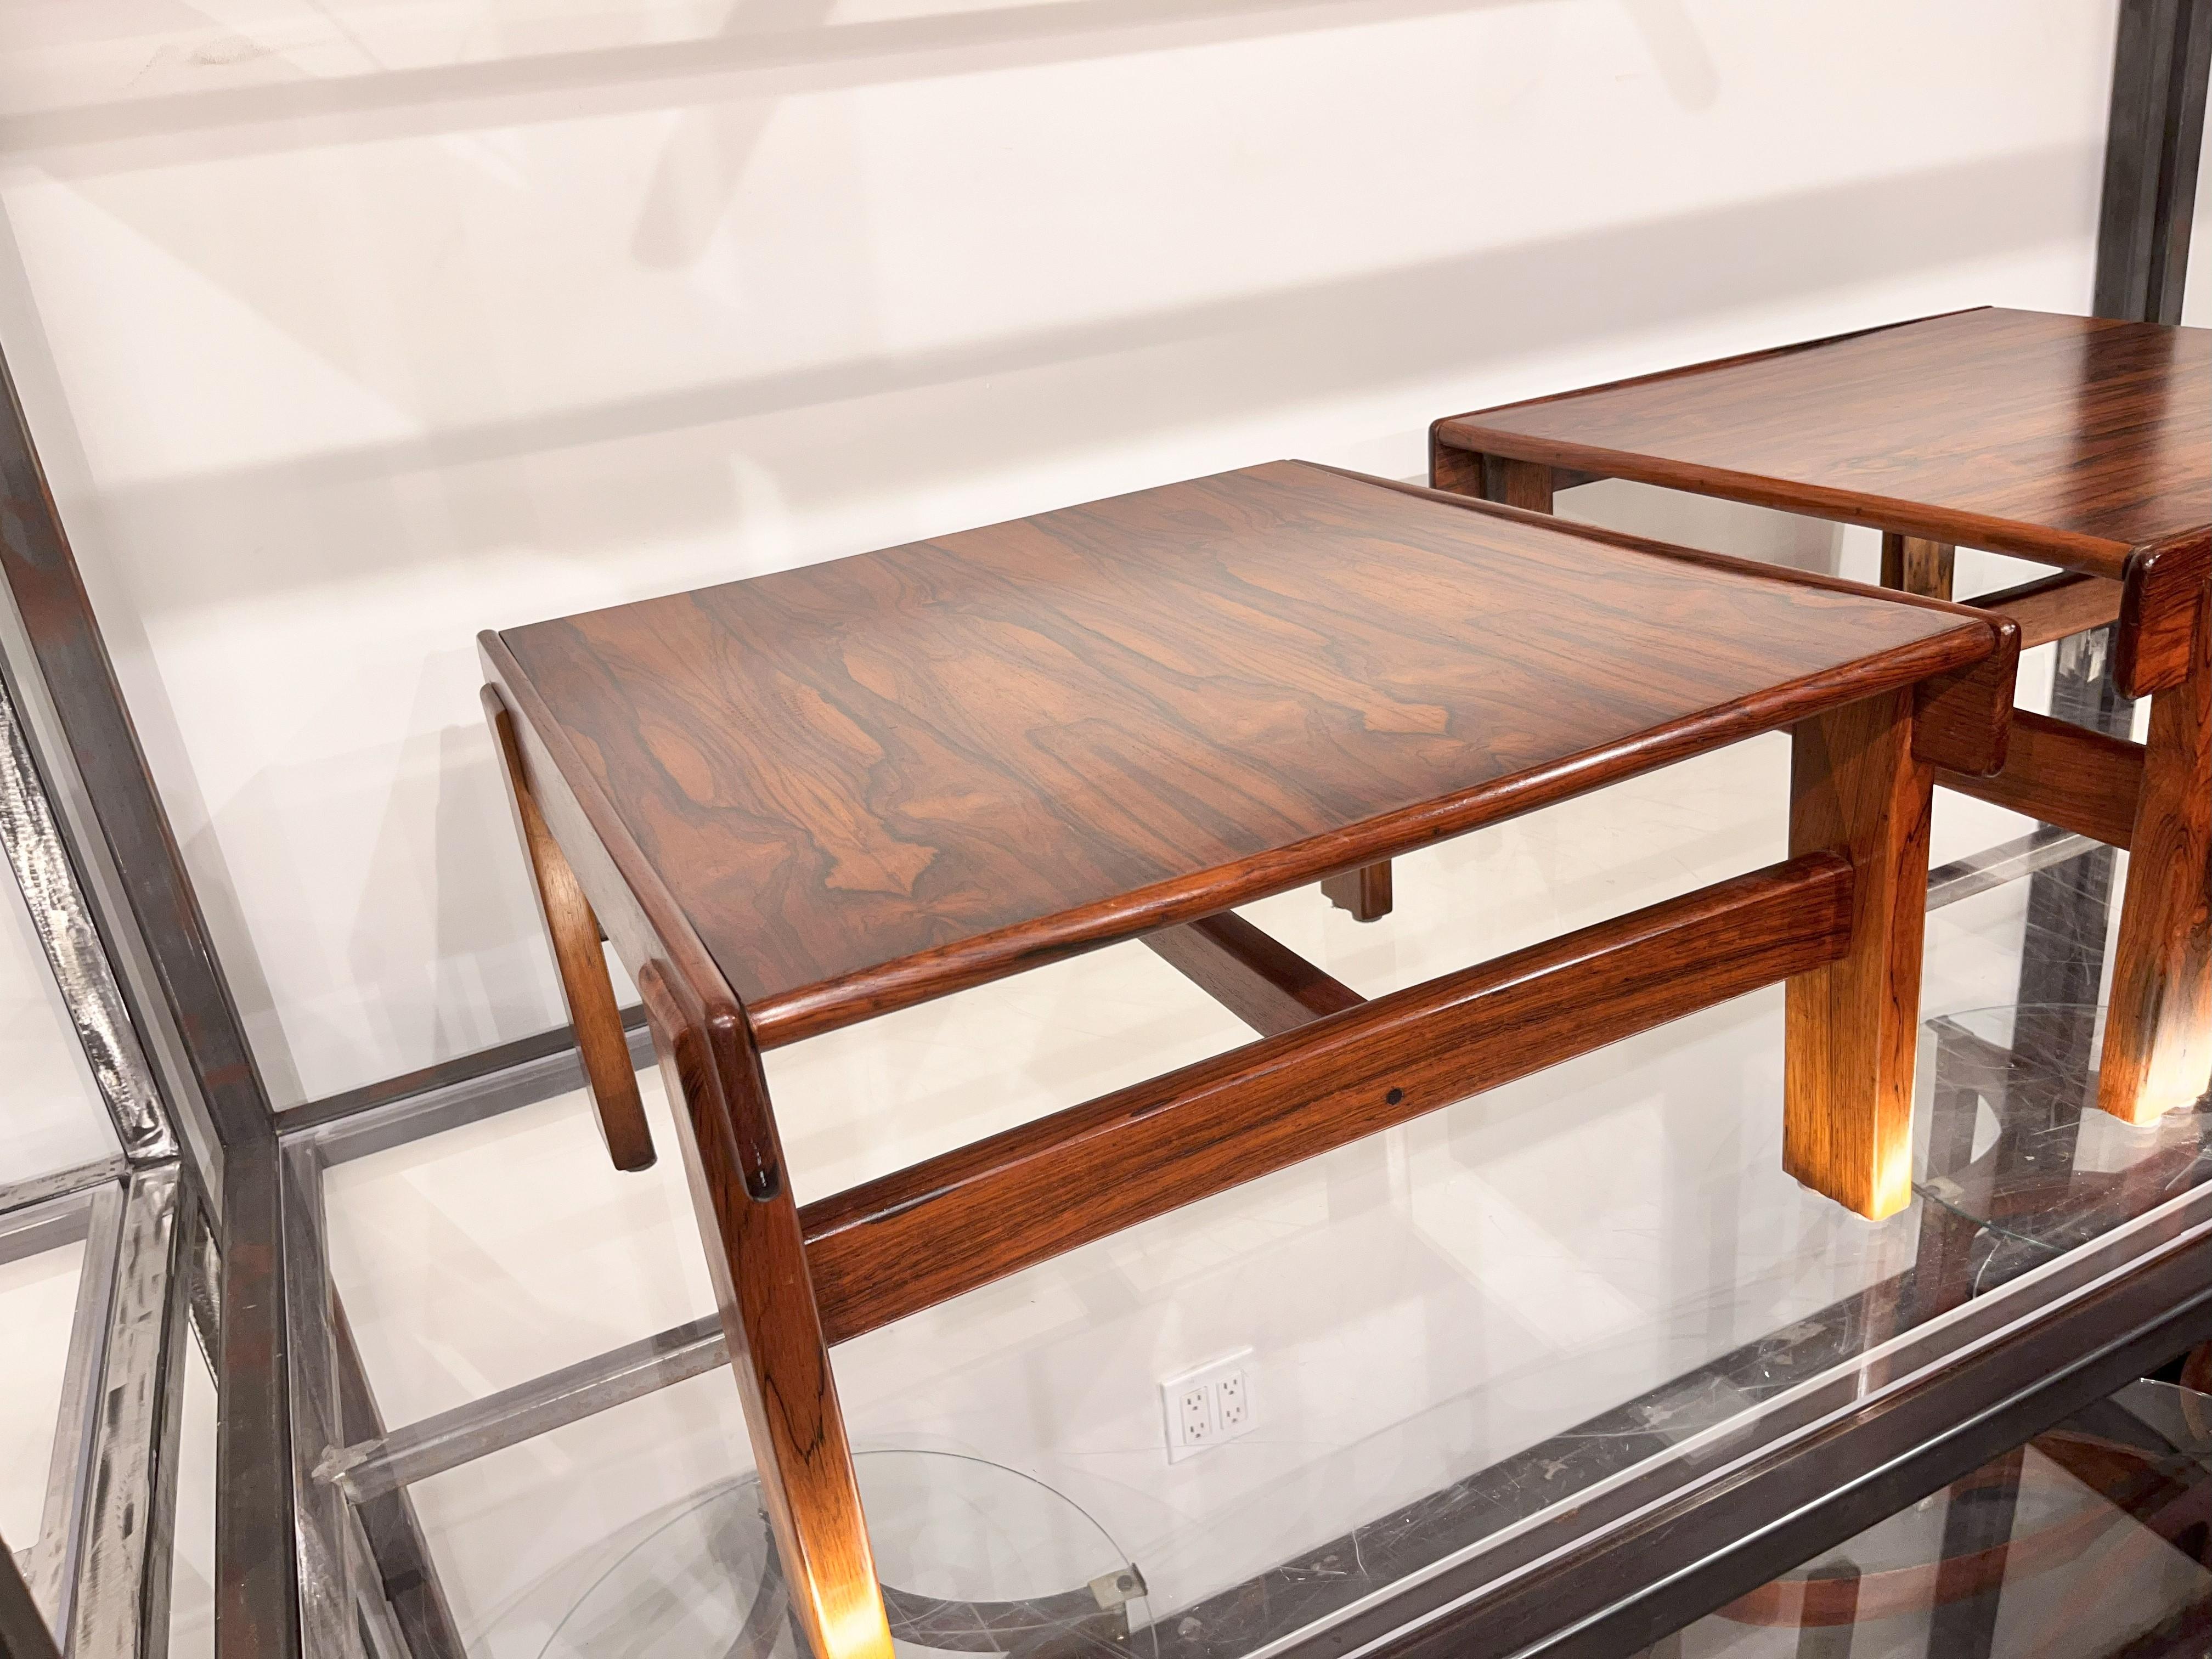 Midcentury Modern Side Table set in Hardwood by Jean Gillon, 1960s For Sale 1